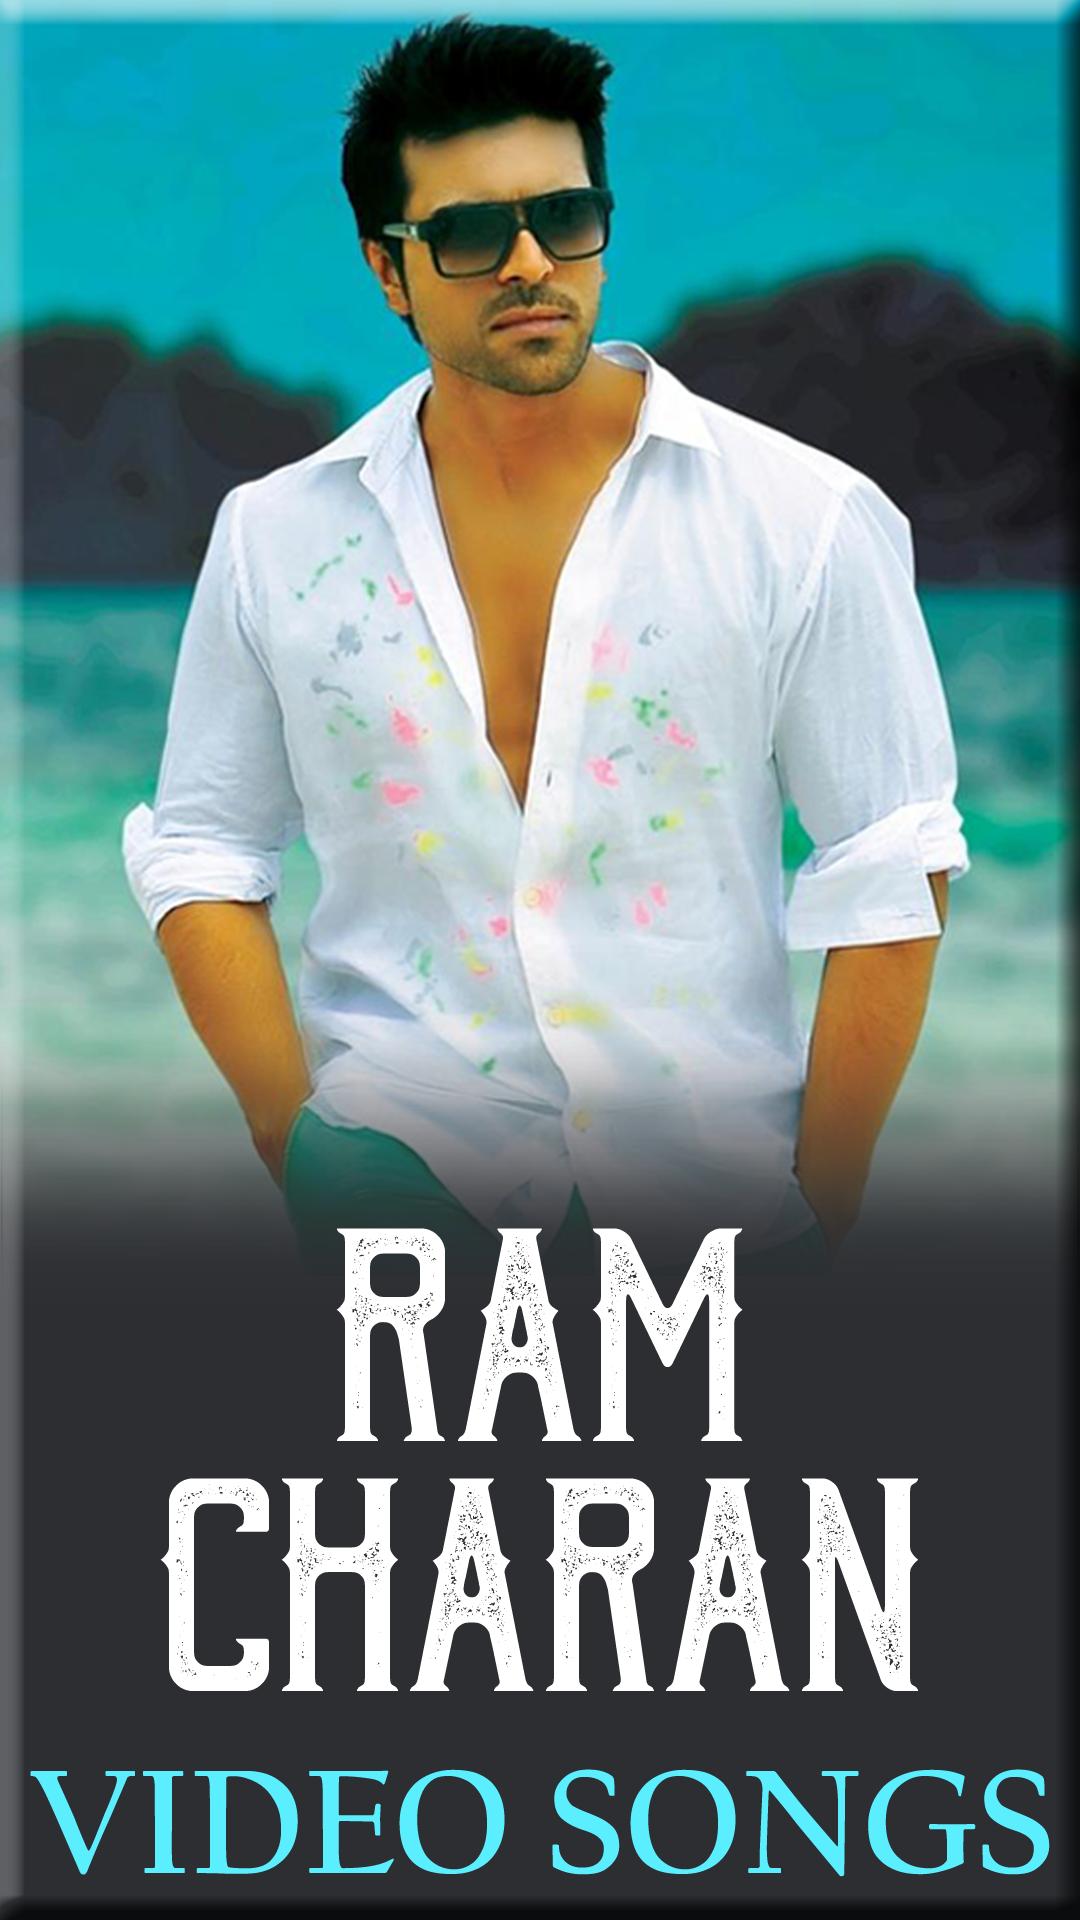 Ram Charan Hit Songs - Telugu Video Songs for Android - APK Download